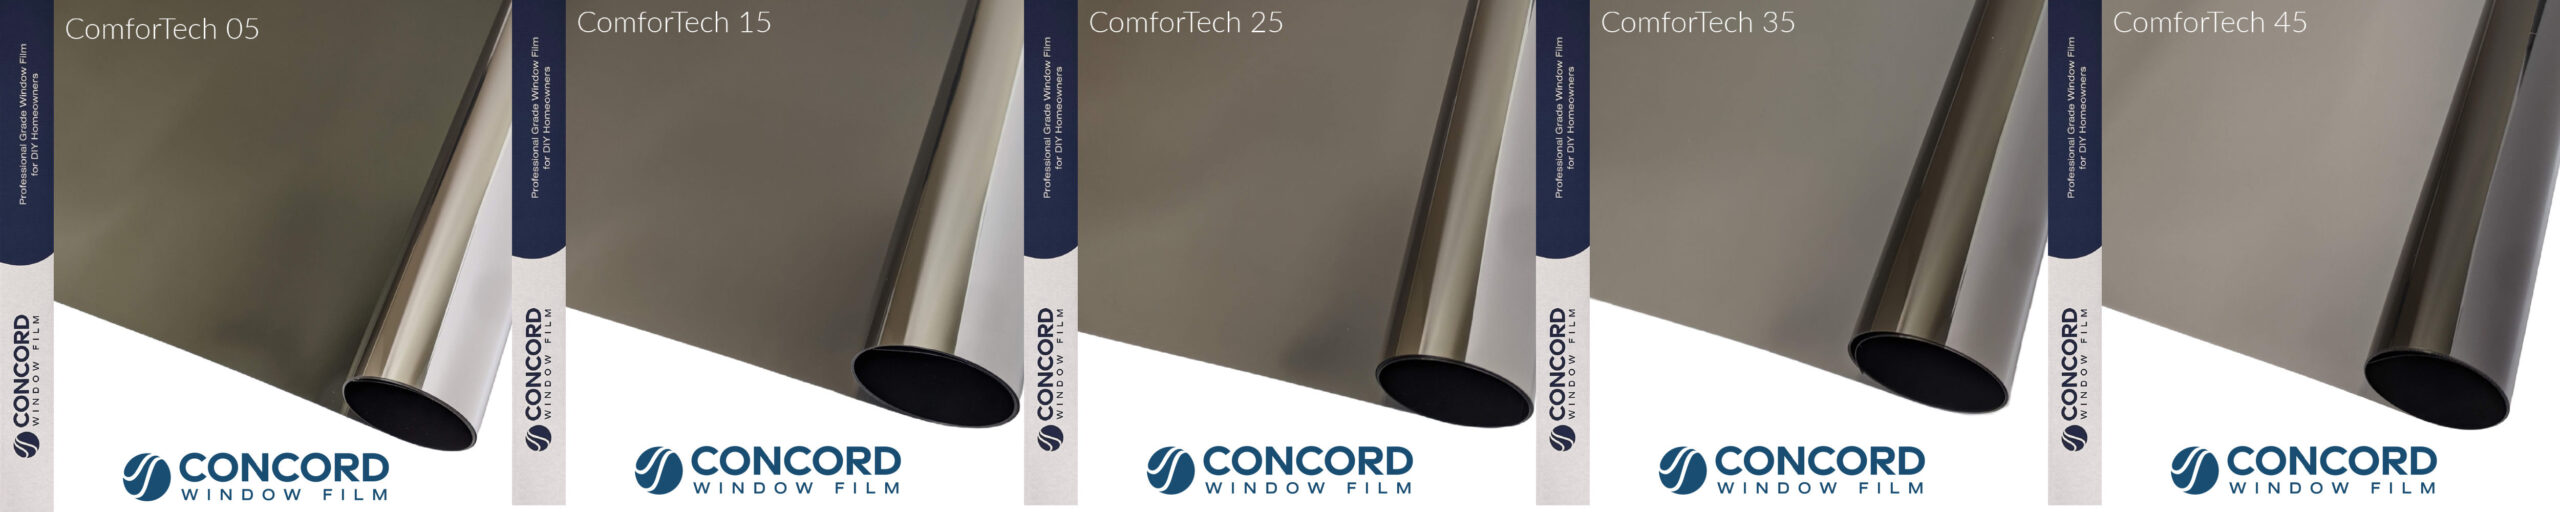 Photos of all five ComforTech window films arranged by VLT or shade from darkest to lightest